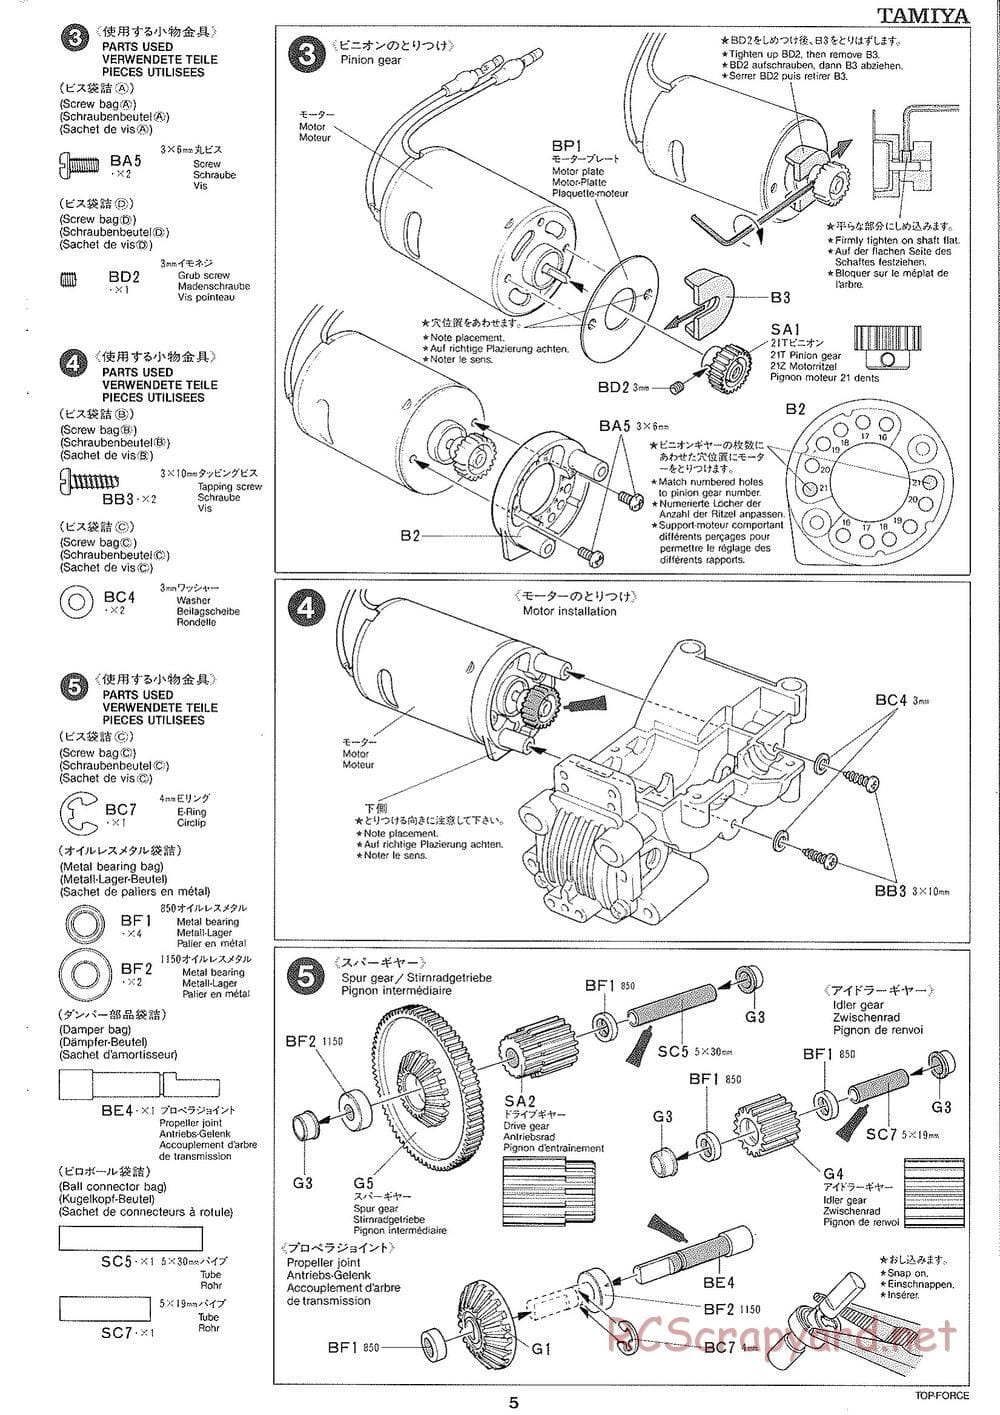 Tamiya - Top Force 2005 - DF-01 Chassis - Manual - Page 5